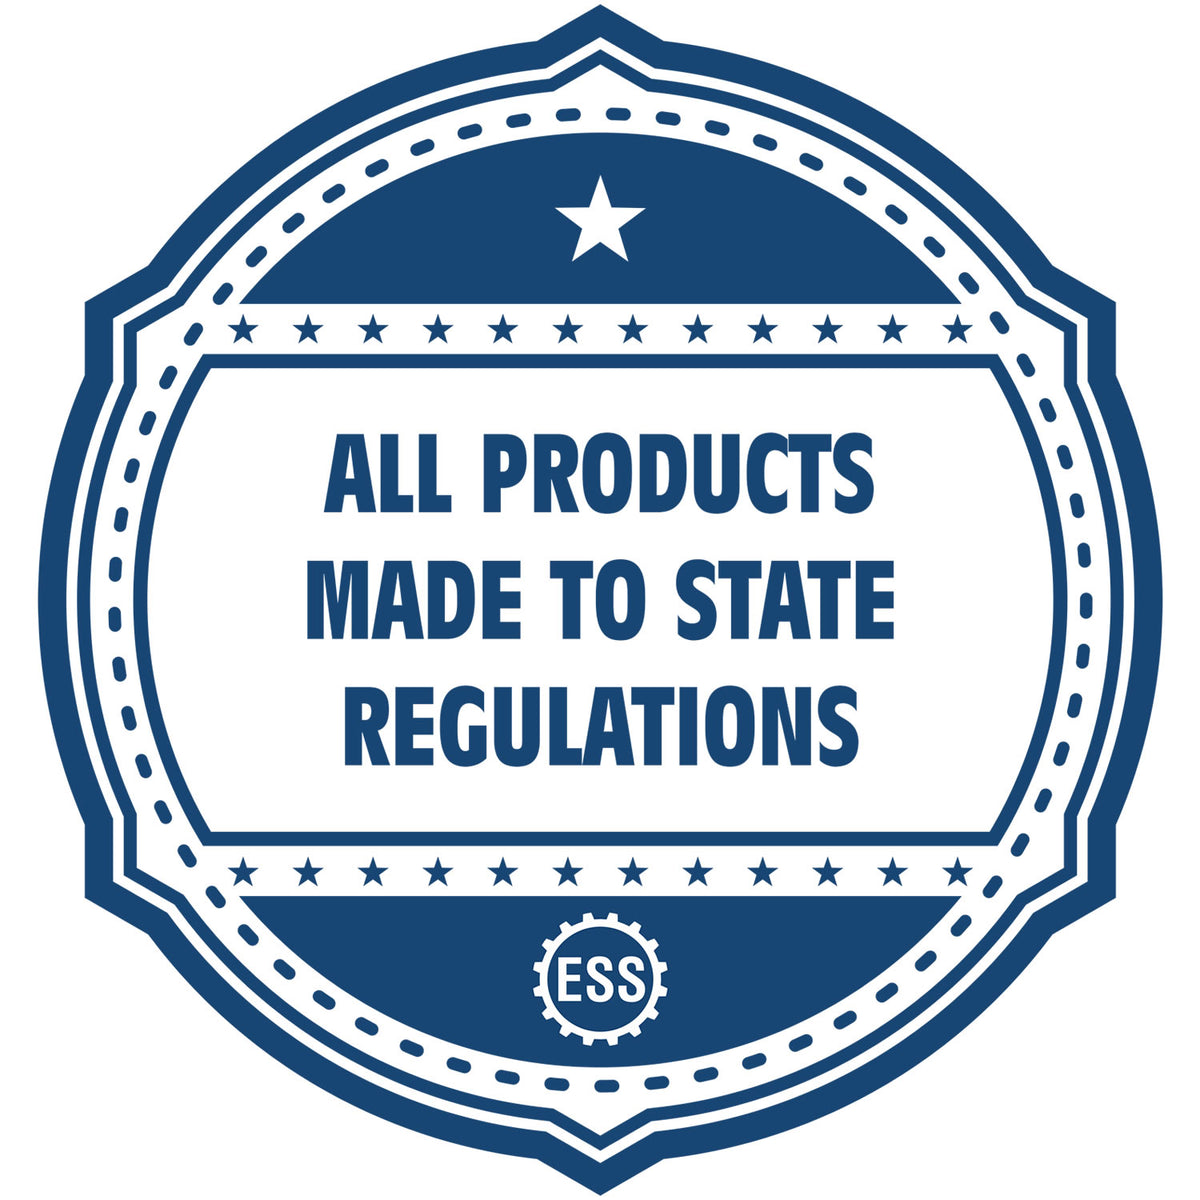 An icon or badge element for the Utah Desk Architect Embossing Seal showing that this product is made in compliance with state regulations.